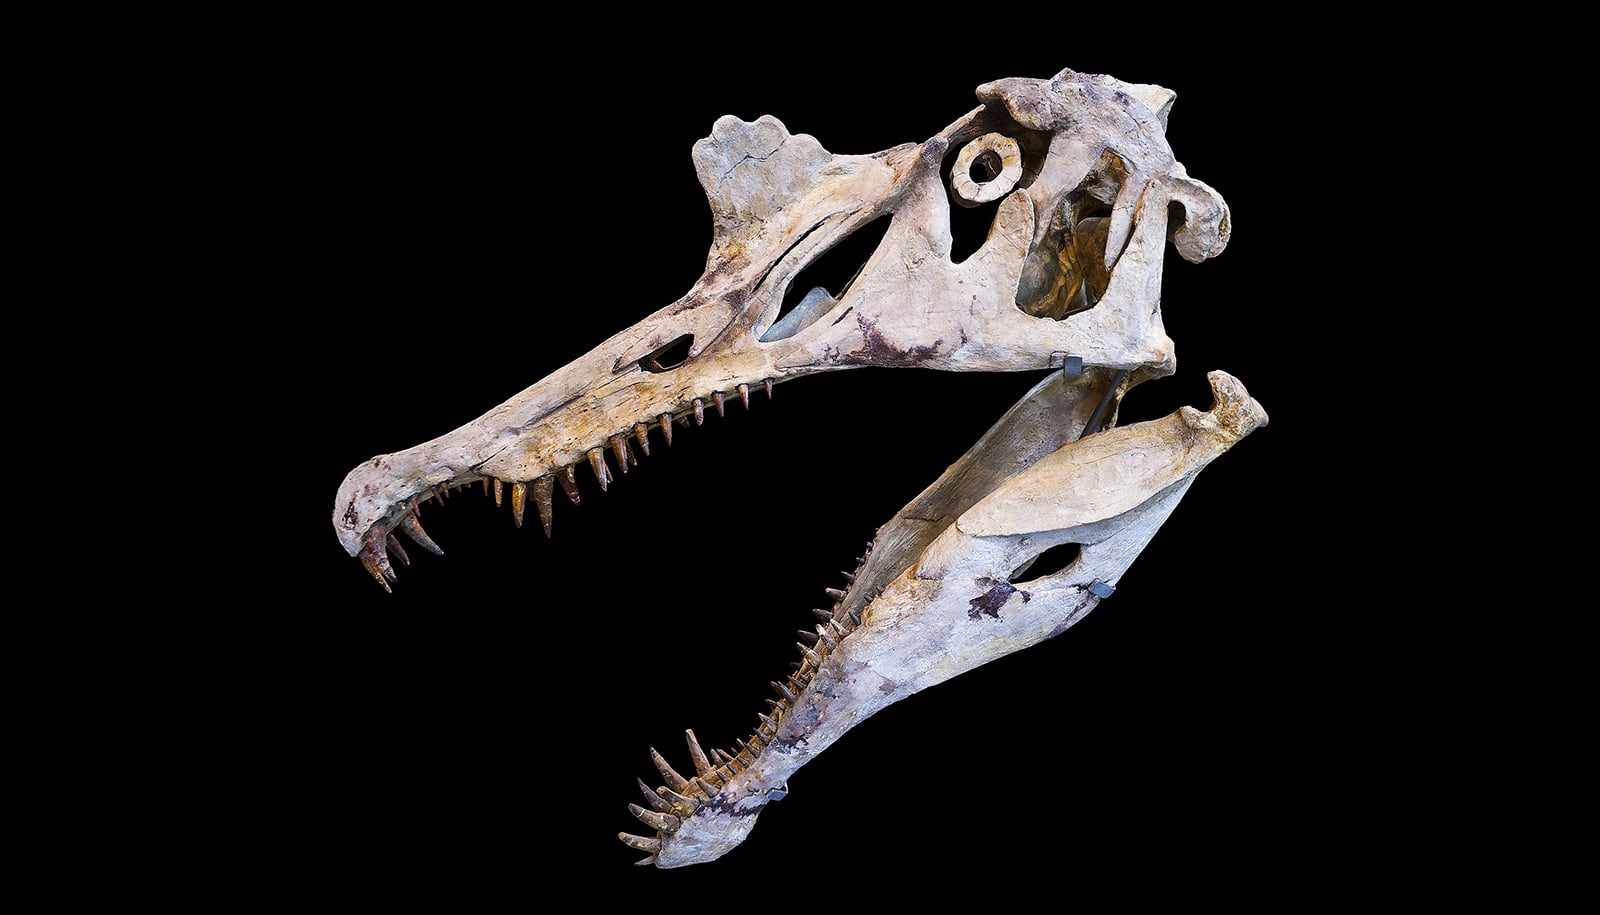 fossil skull with gaping mouth and snaggle teeth on lower jaw